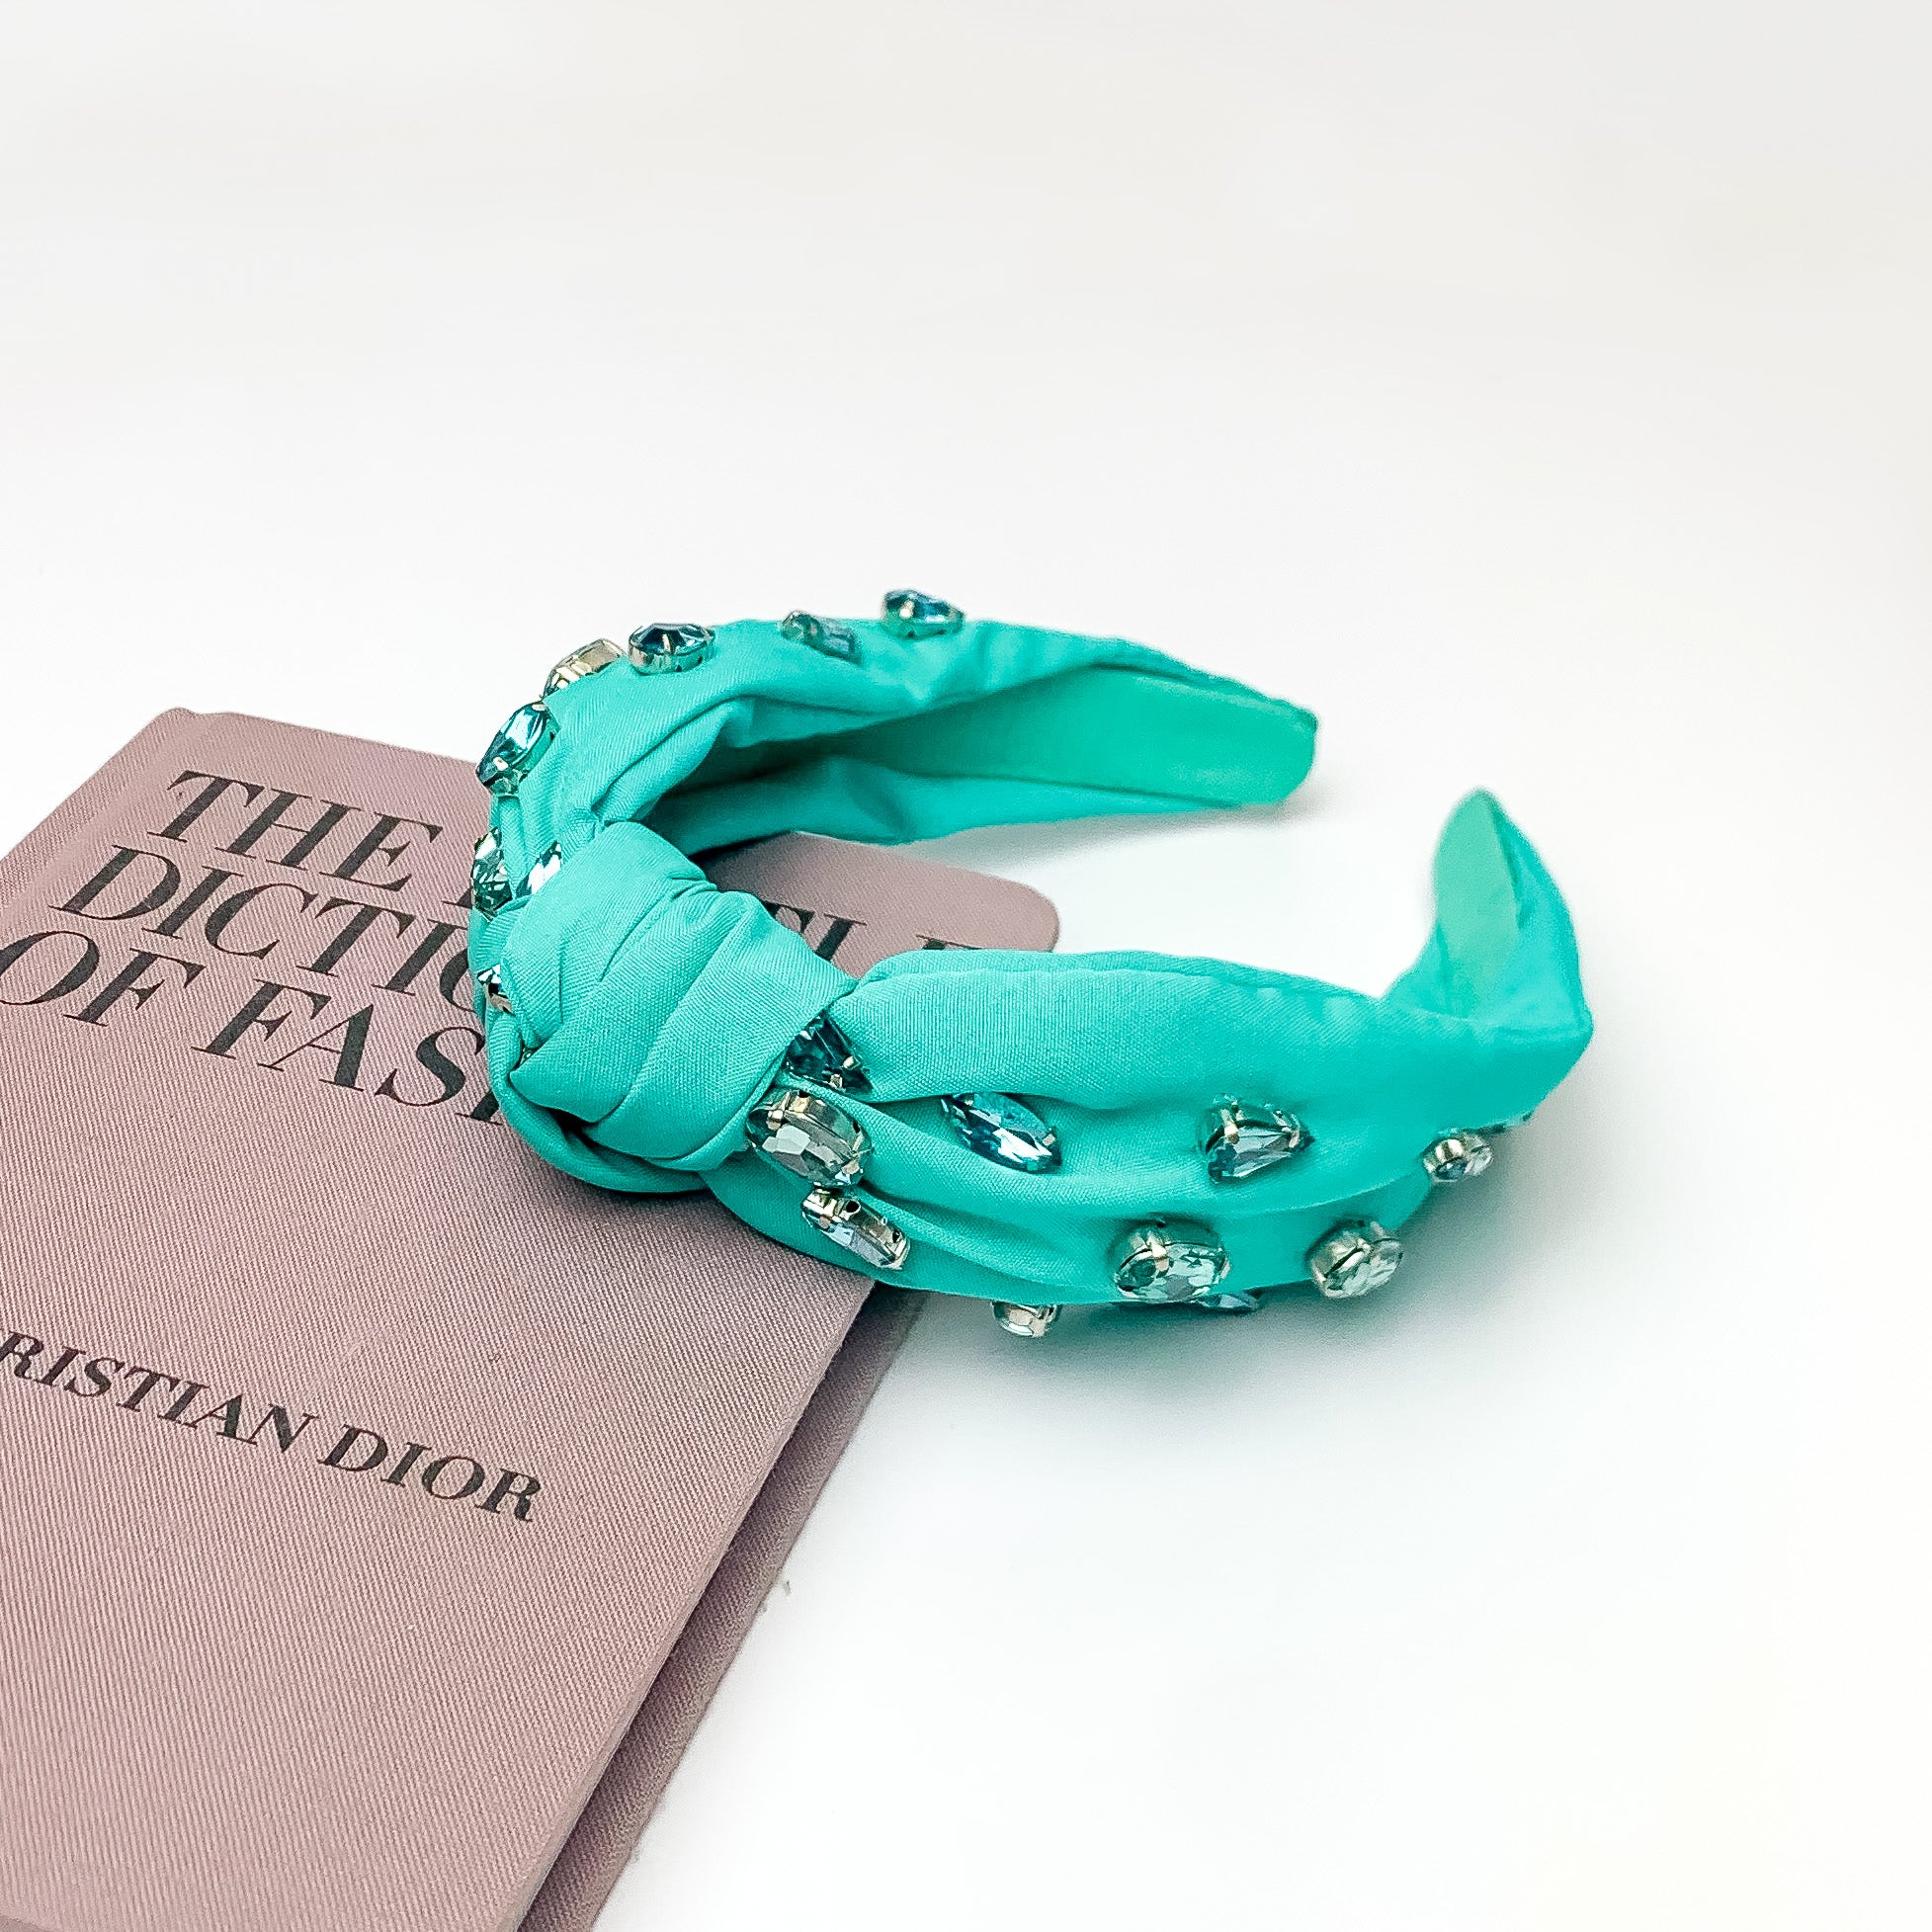 Crystal Detailed Knot Headband in Turquoise Green. Pictured on a white background with the headband laying against a pink book.